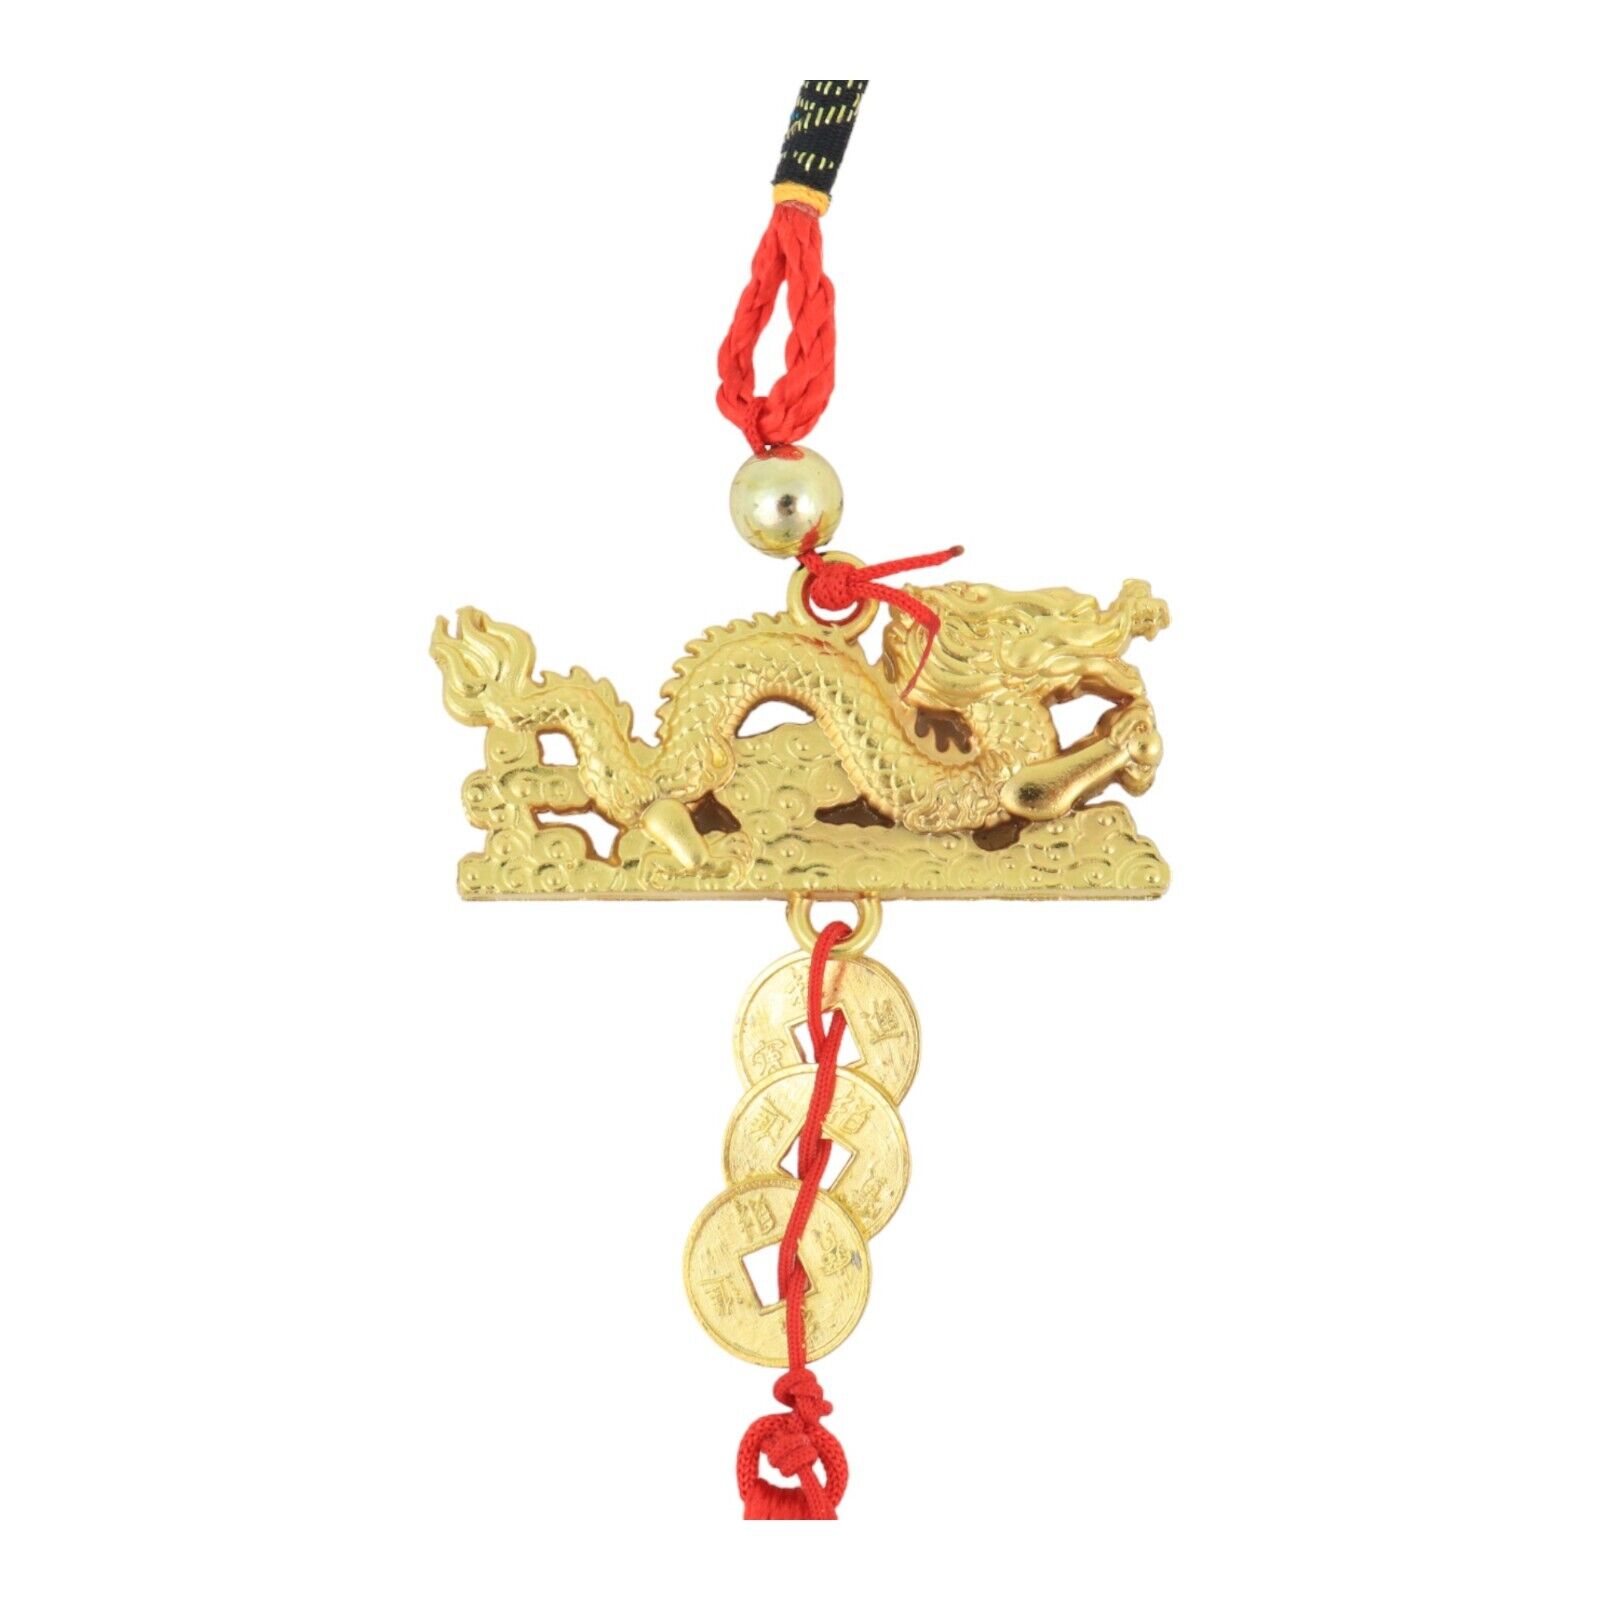 2024 Shining Gold Dragon Charm for the Lunar Year of the Dragon